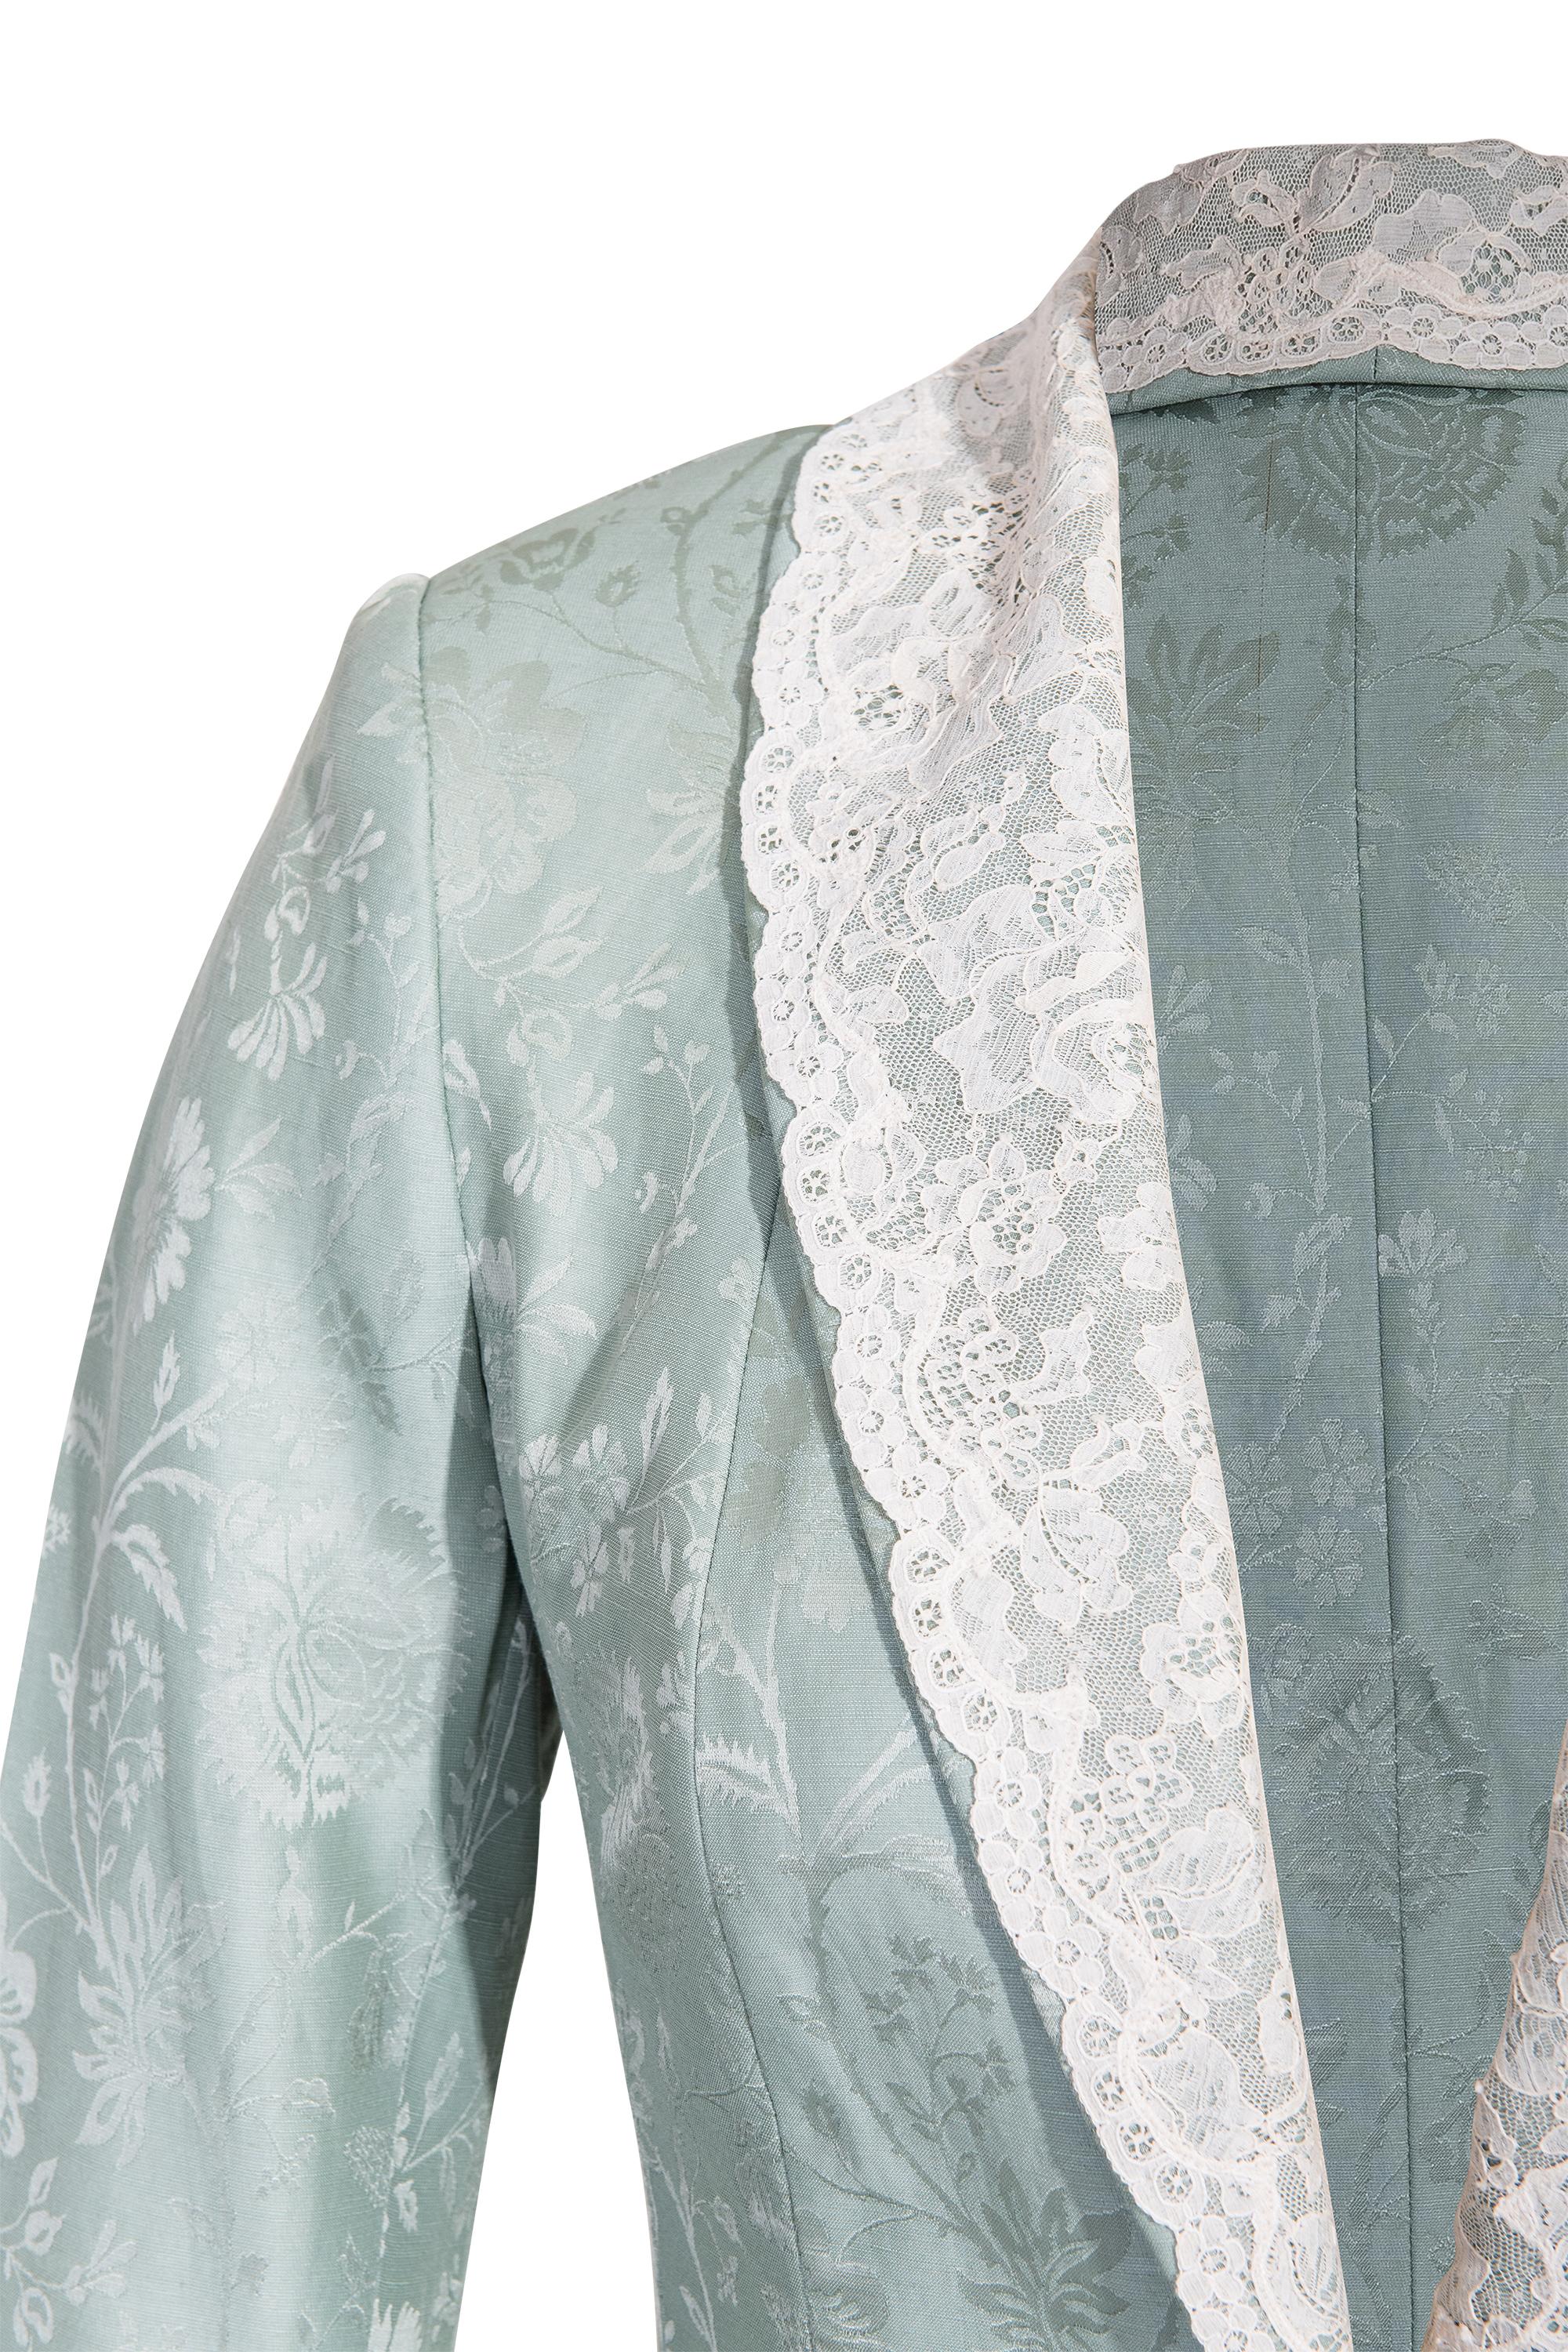 S/S 1998 Christian Dior by John Galliano Green Floral Pattern Jacket 2